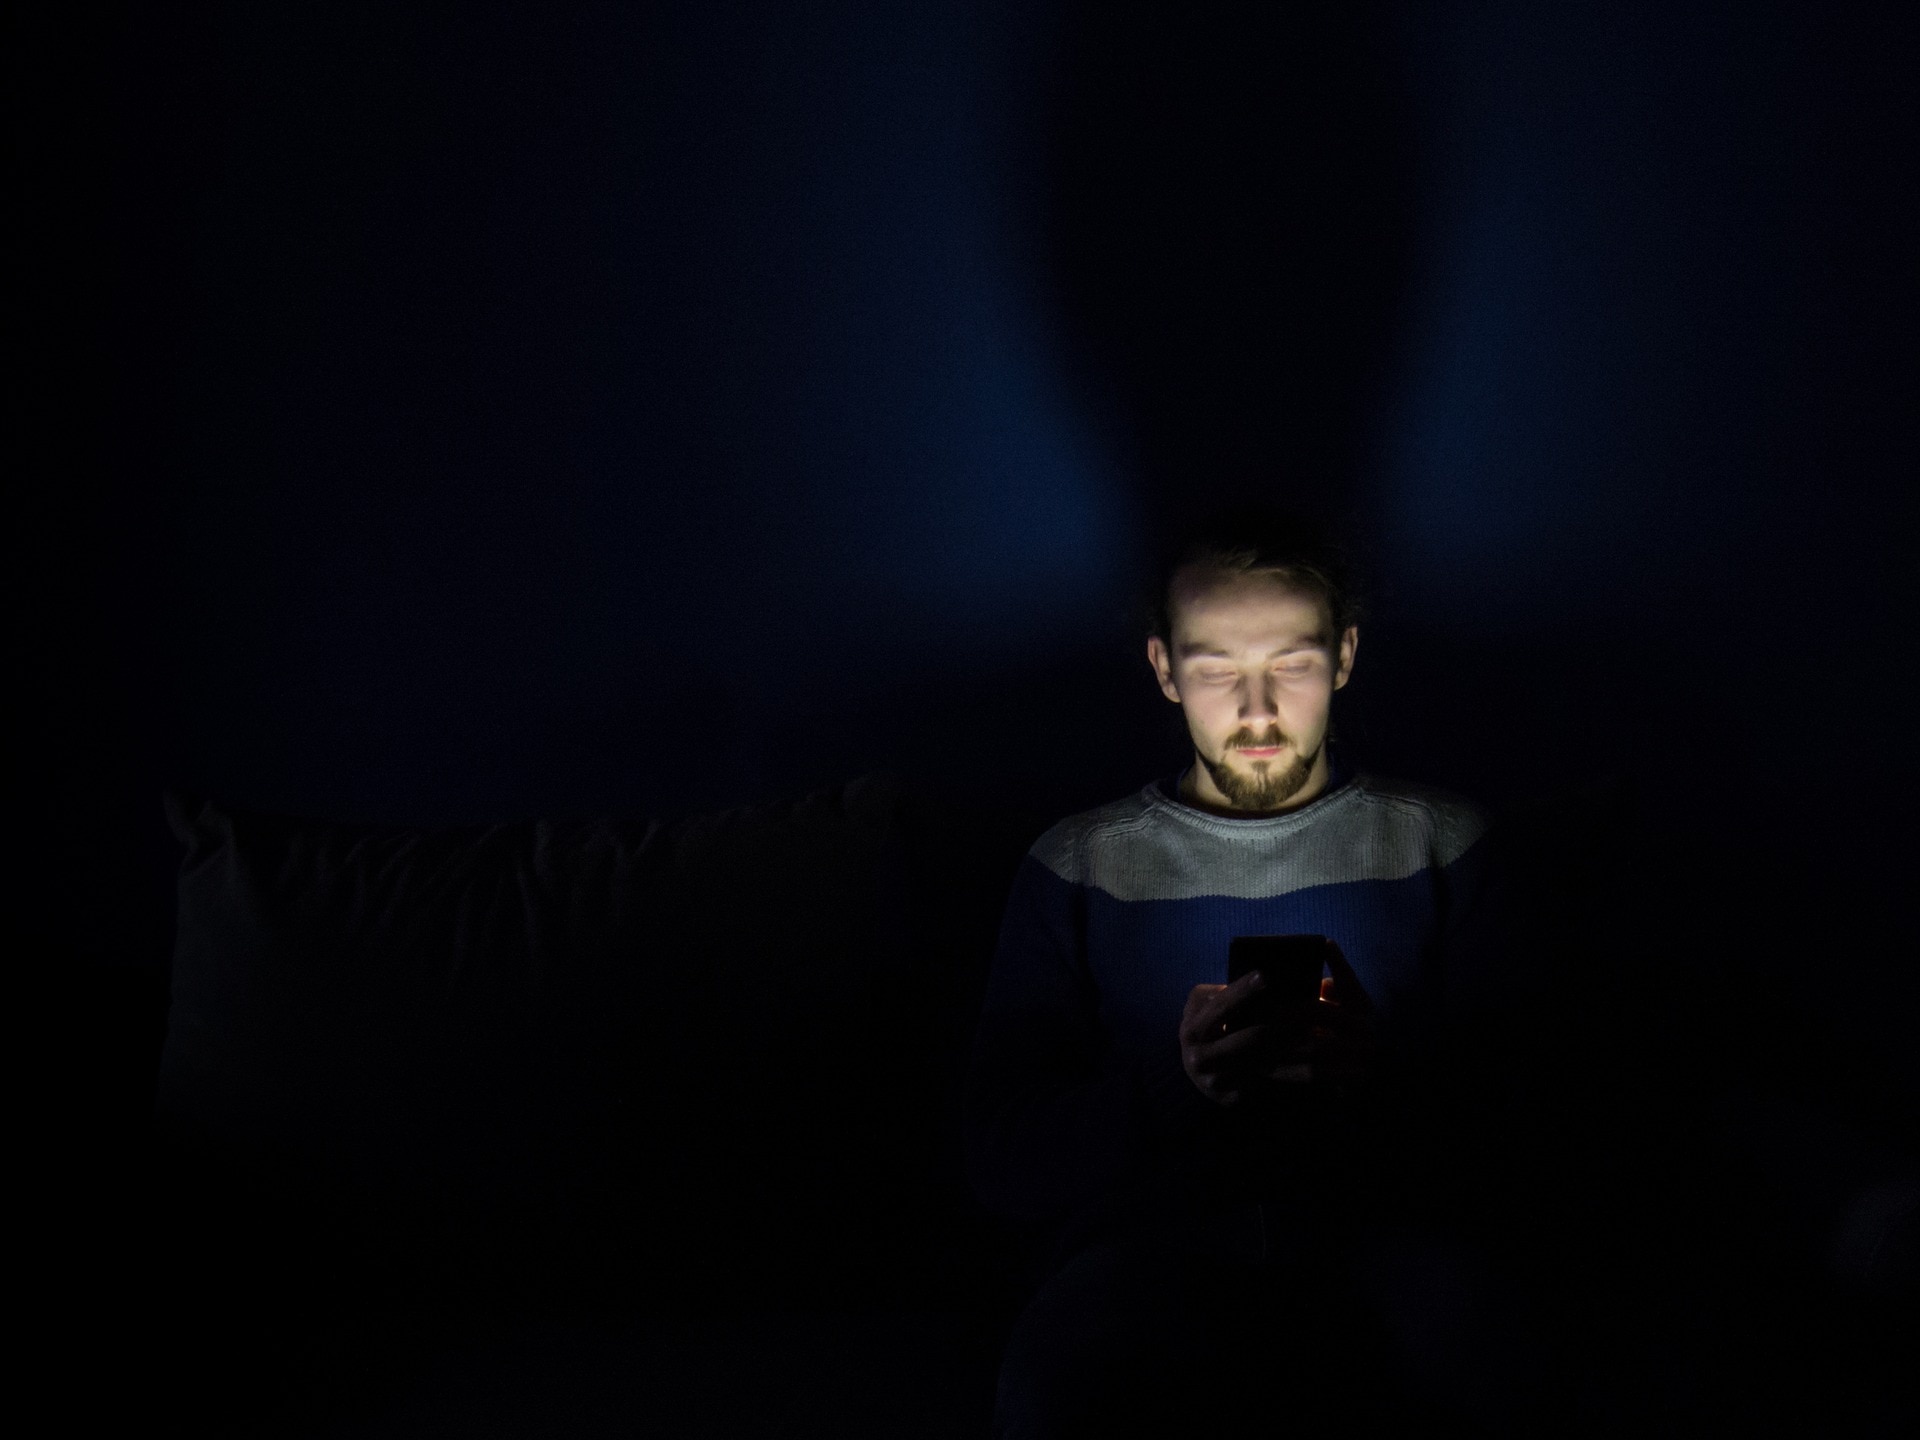 Image of a man using a mobile phone at night with visible blue light emitting from its screen.